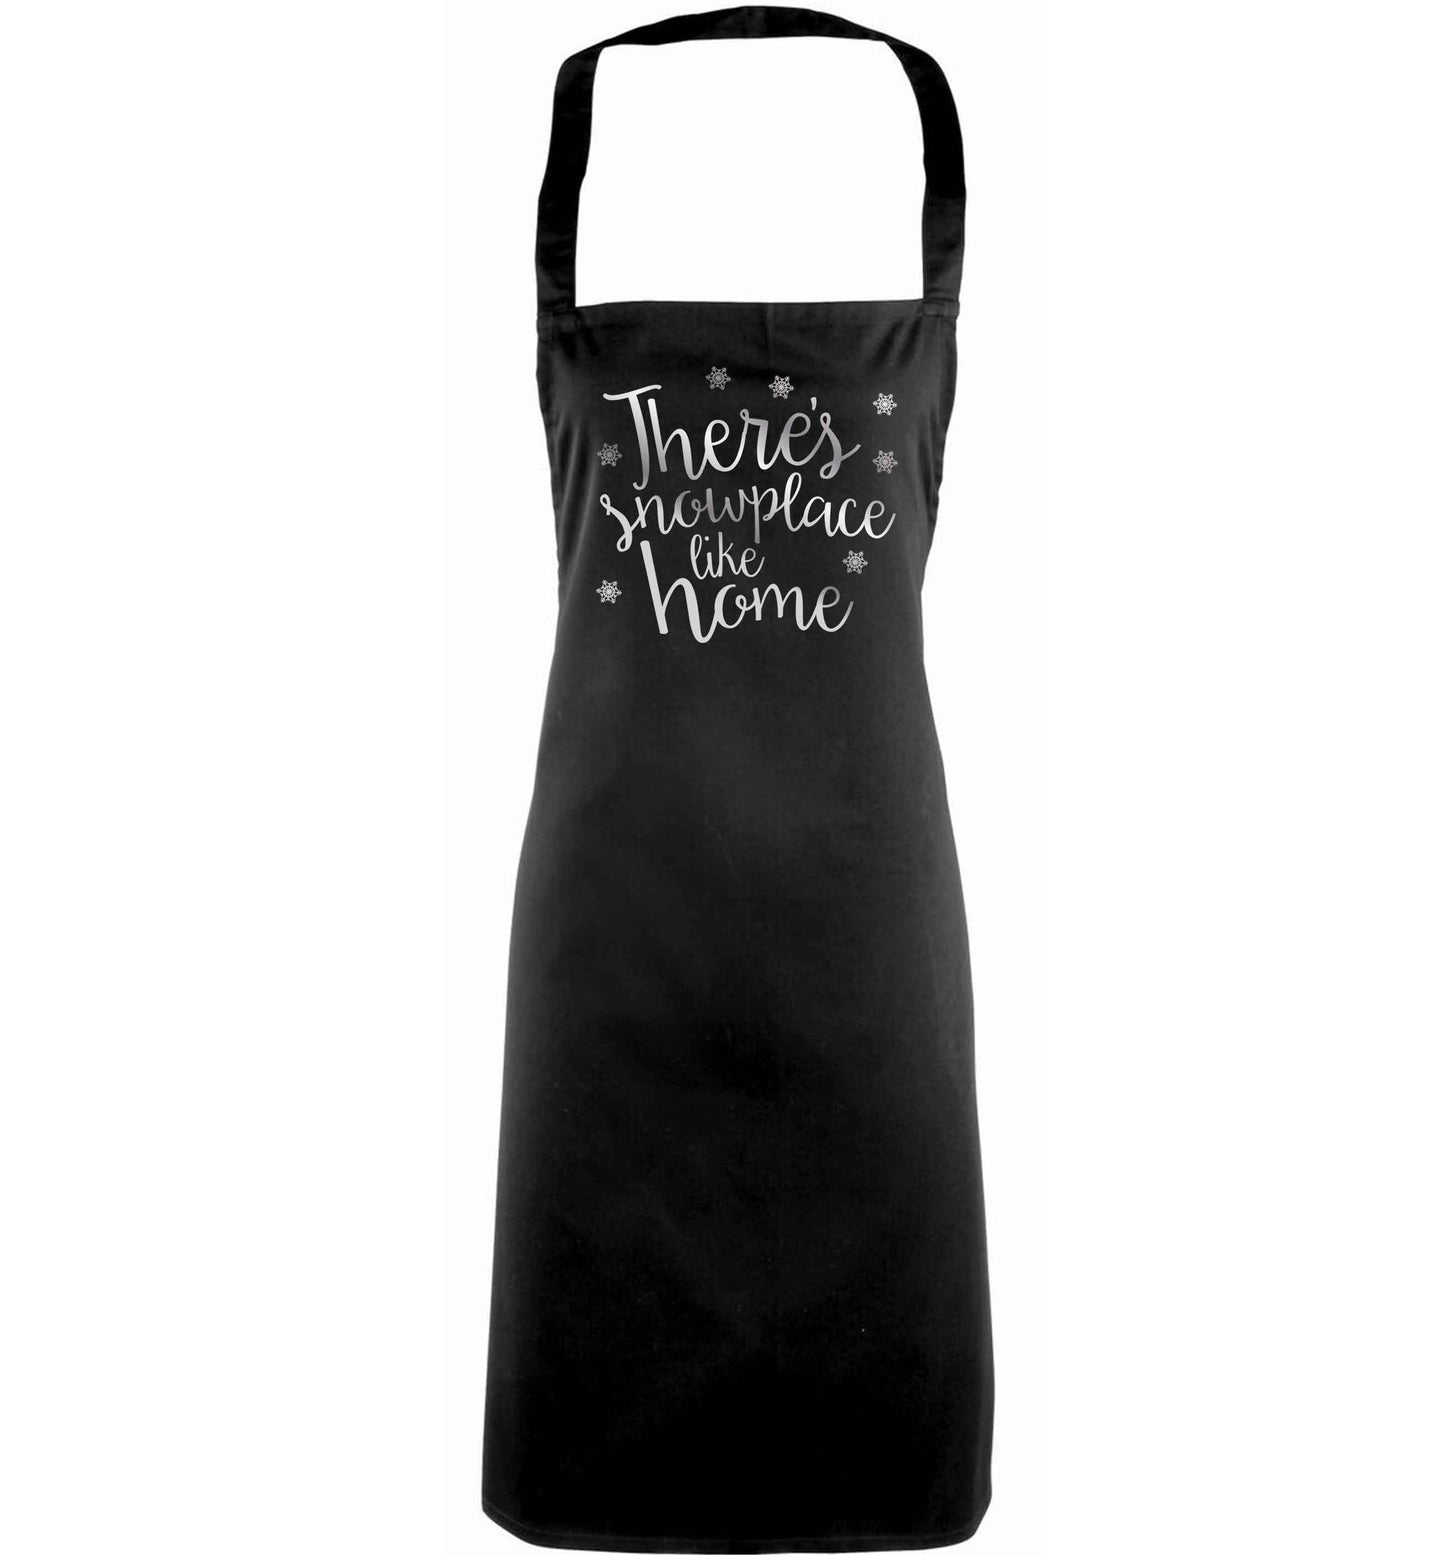 There's snowplace like home - metallic silver adults black apron